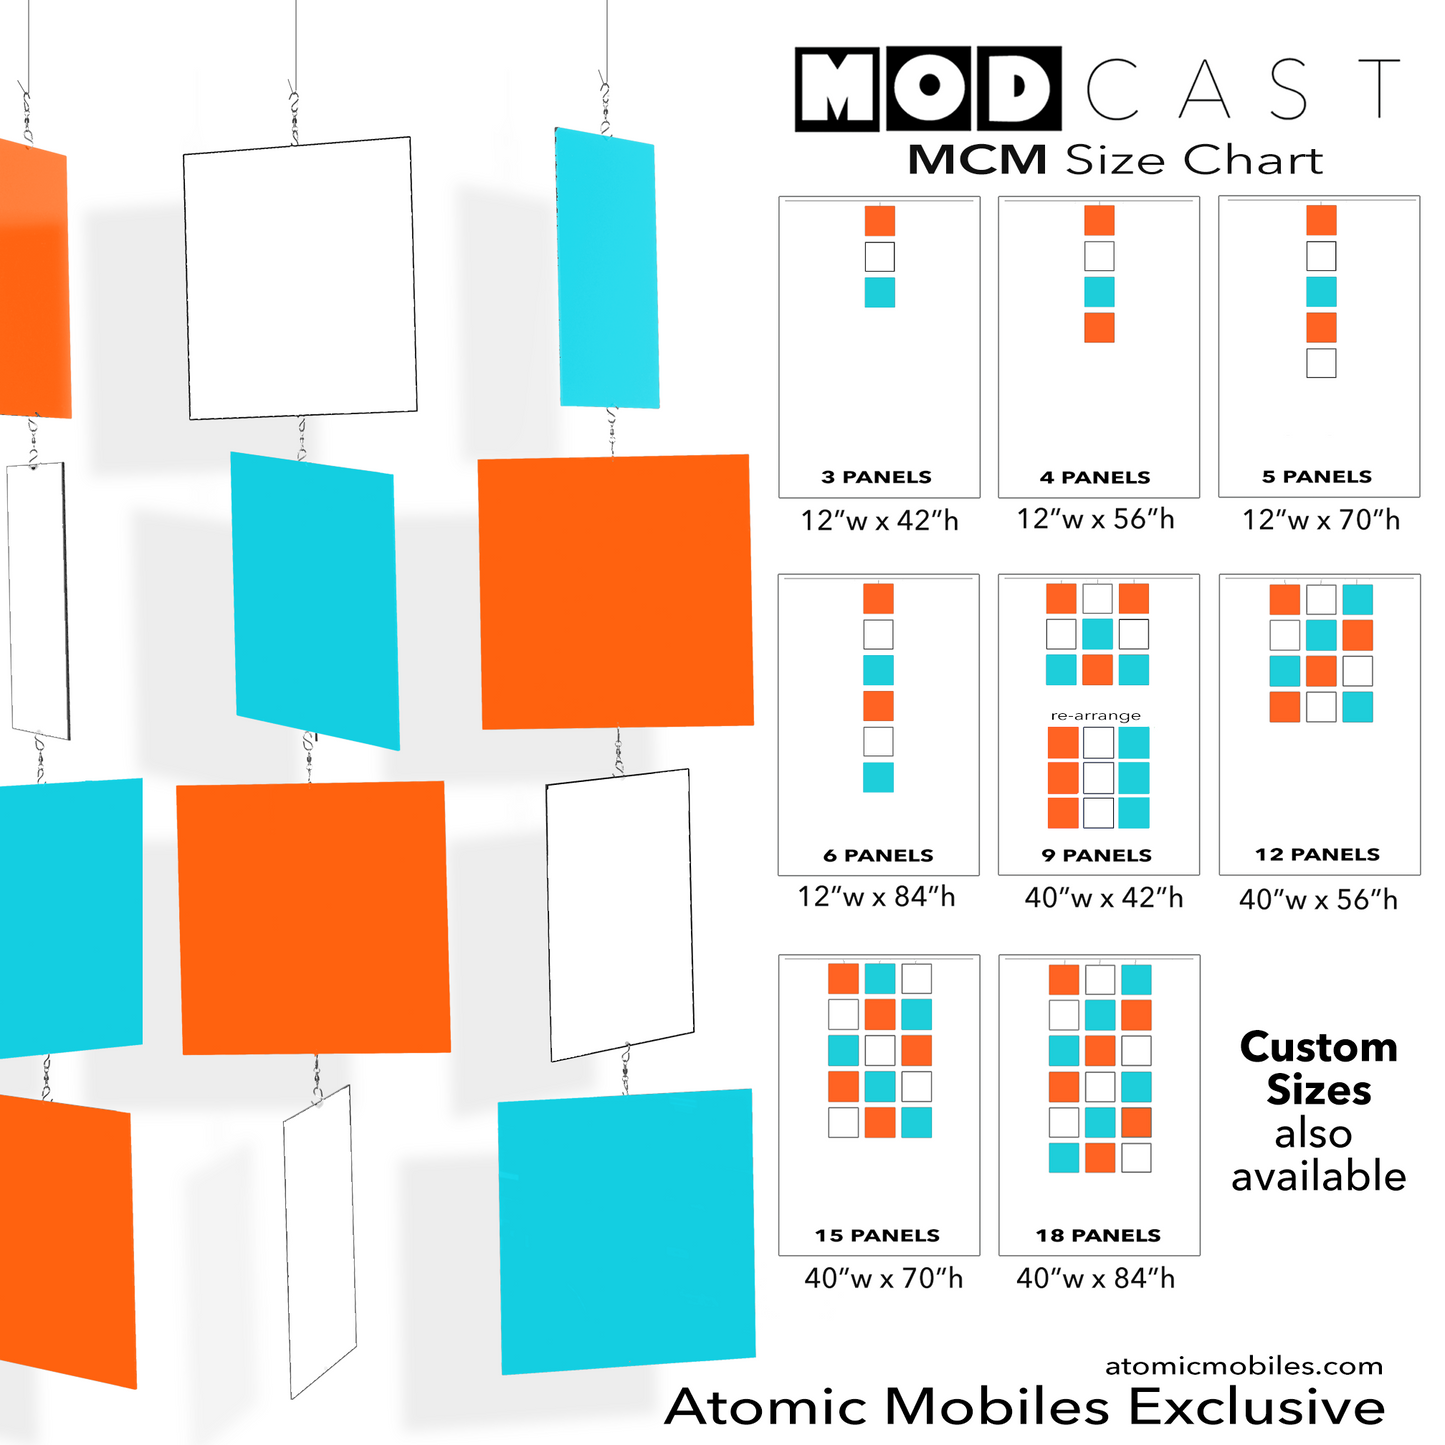 MCM Palm Springs style MODcast kinetic hanging art mobiles in Orange, Aqua Blue, and White acrylic plexiglass panels - mid century modern style home decor by AtomicMobiles.com